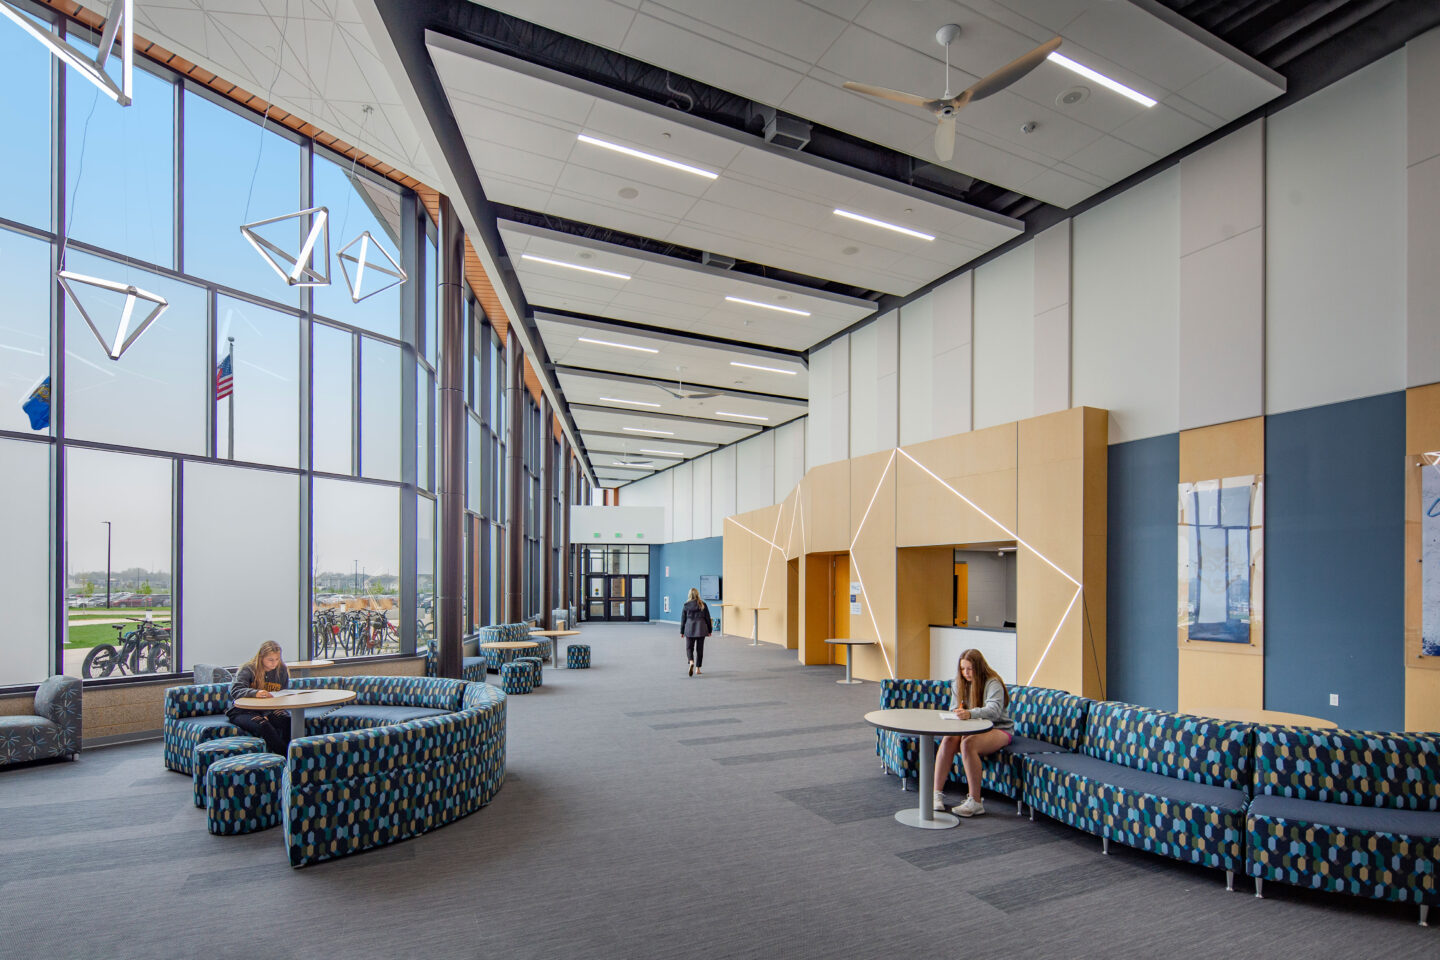 Performing Arts Center lobby with flexible furniture and ticket booth. Hanging triangular lights are in front of the floor-to-ceiling windows.